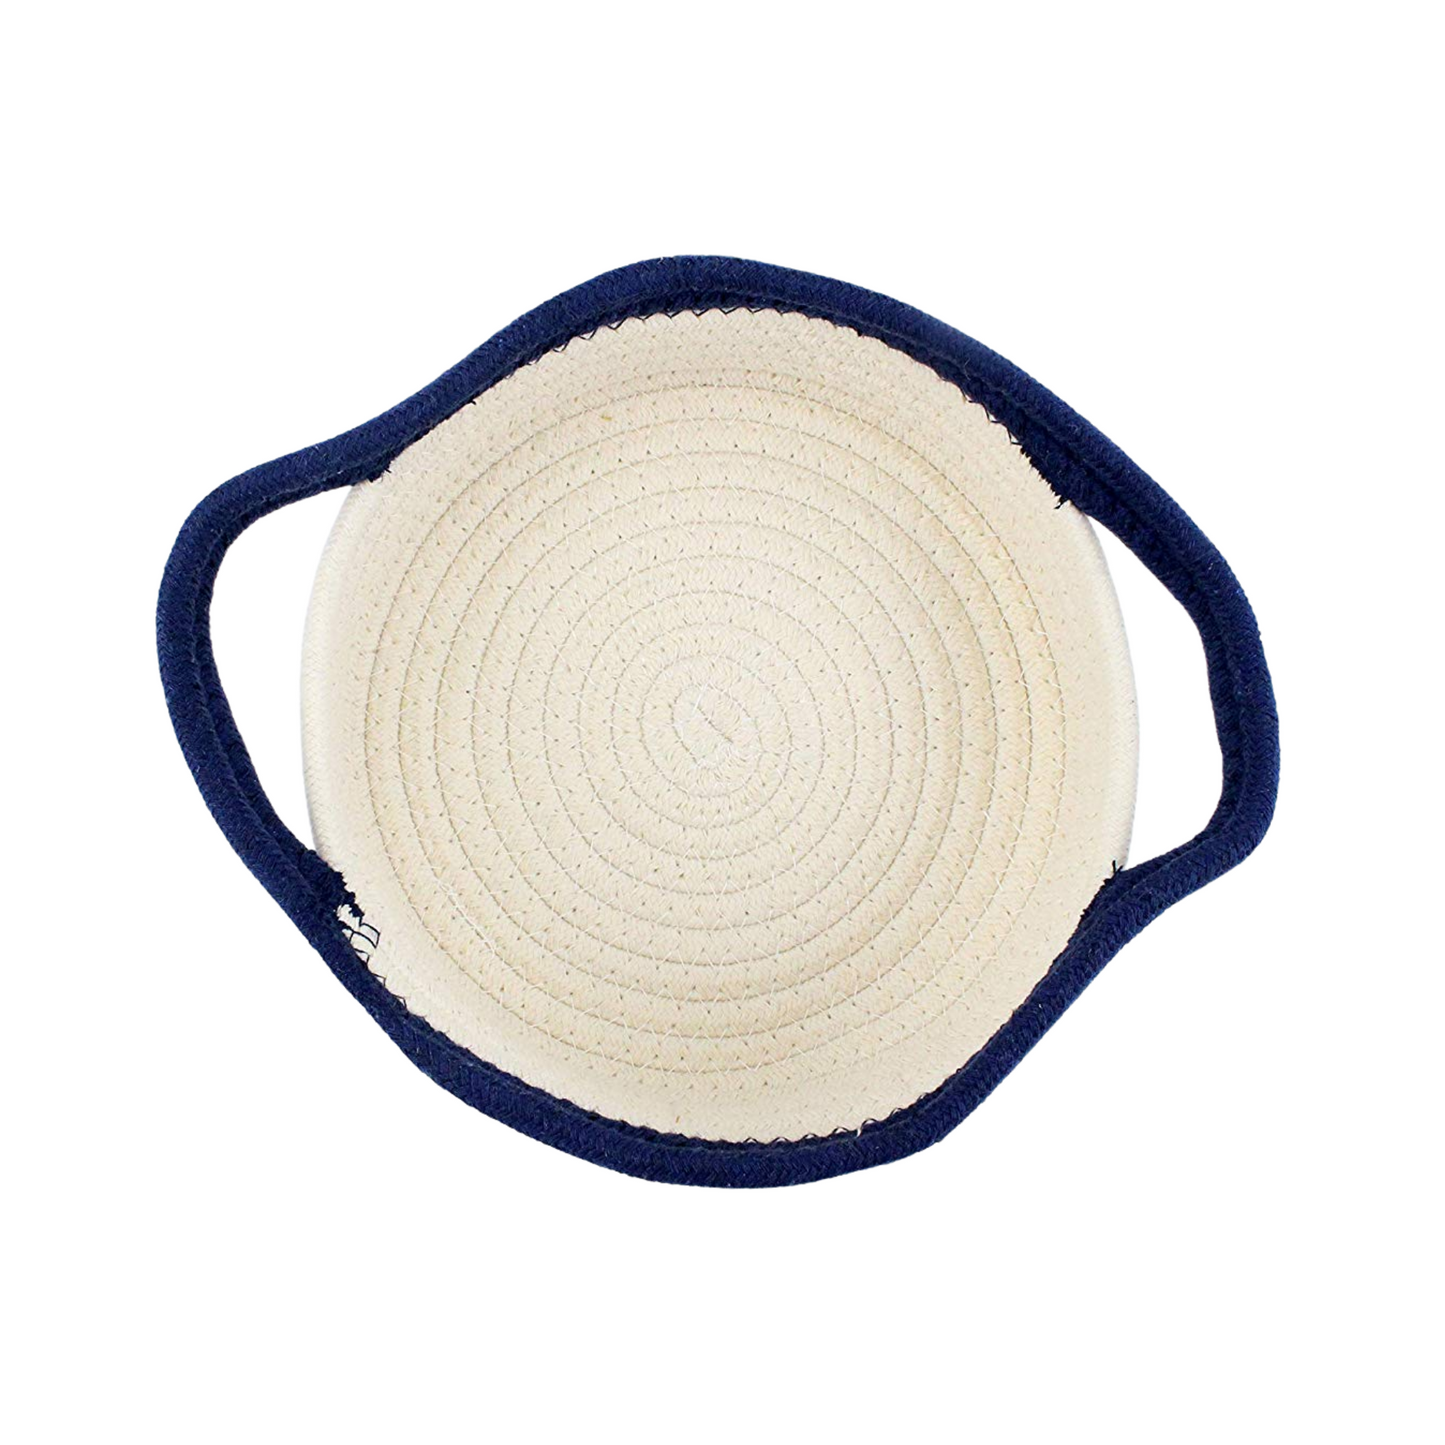 Midlee Cat Toy Rope Cotton Basket